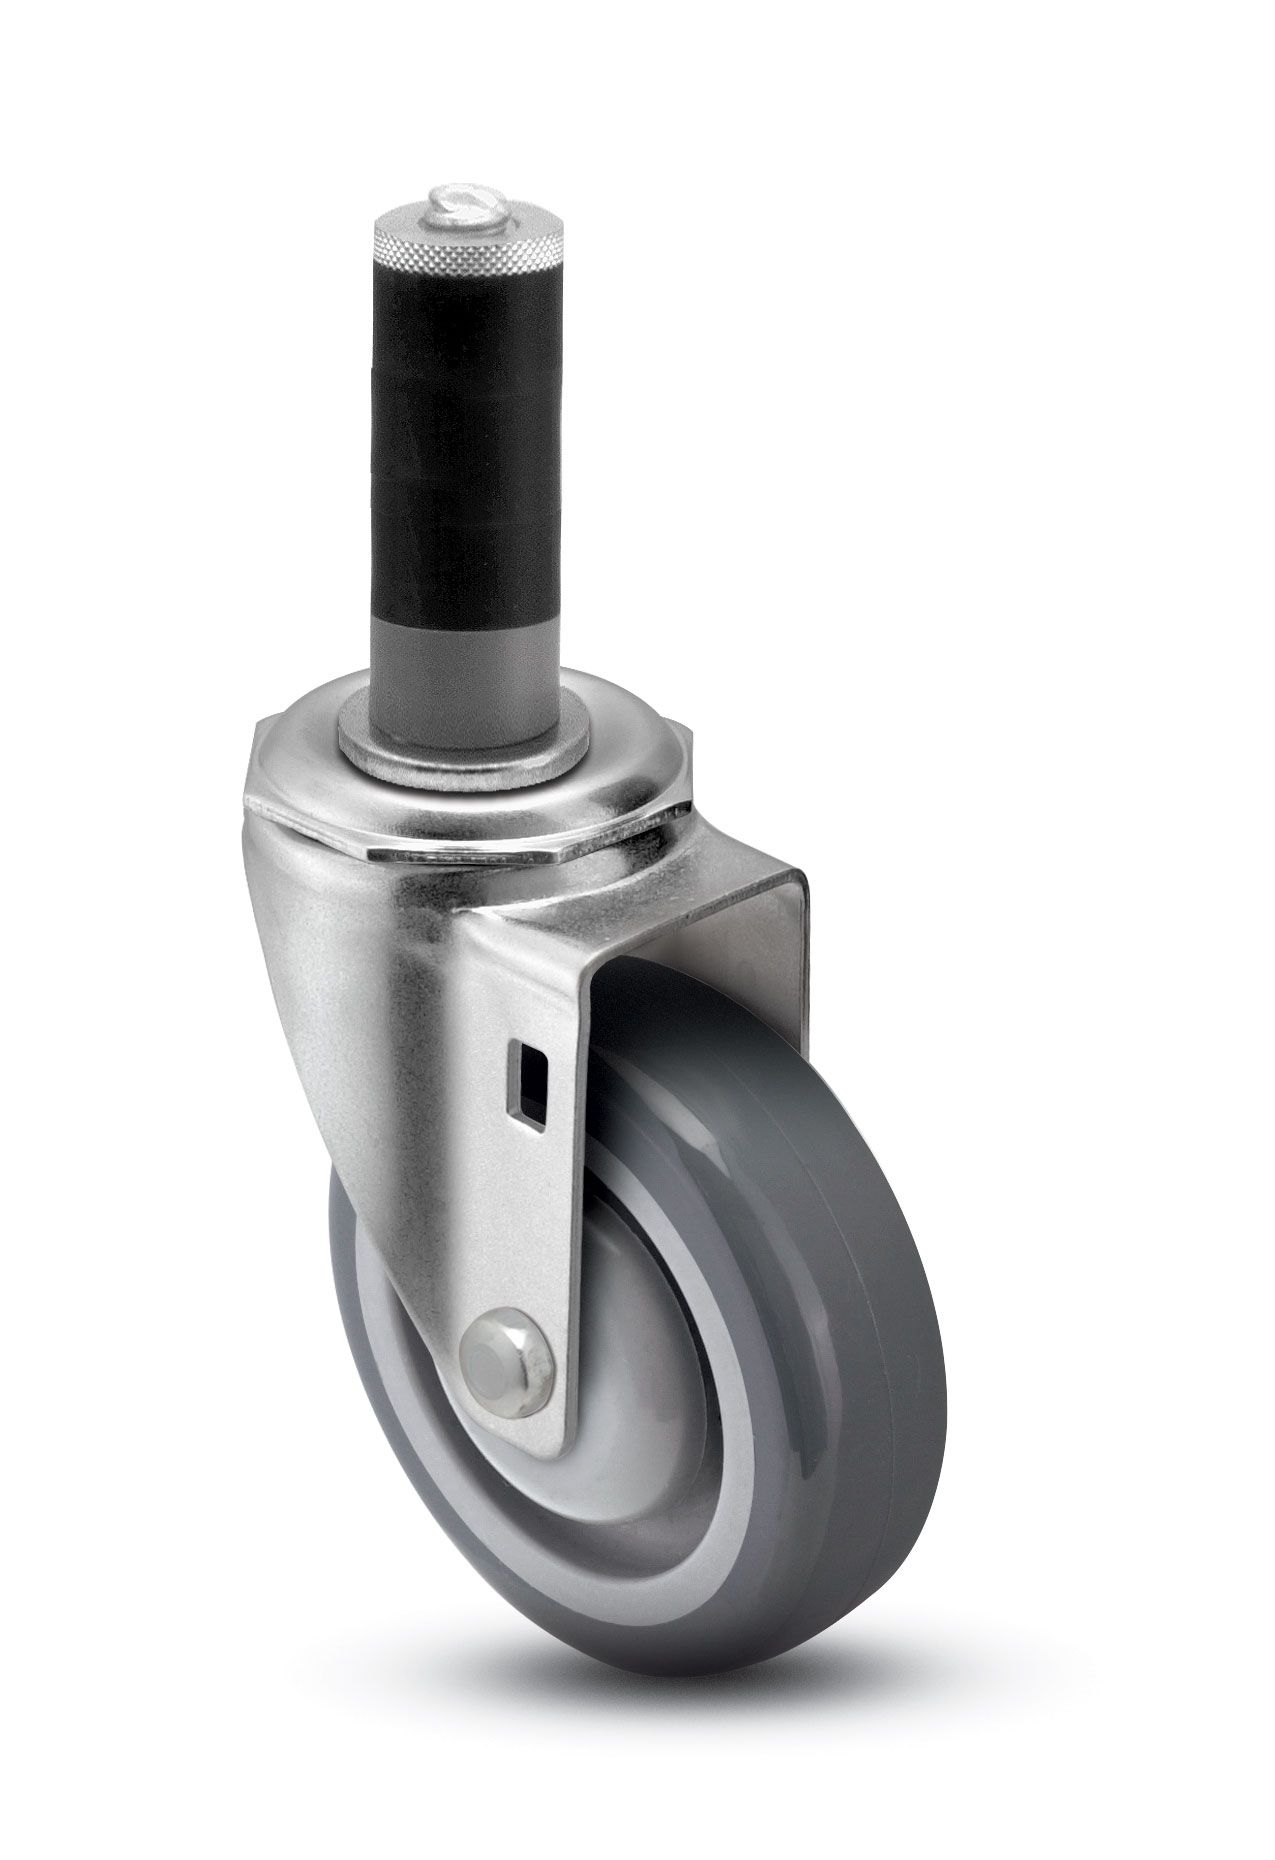 Caster; Swivel; 4" x 1-1/4"; PolyU on PolyO (Gray); Expandable Adapter (0.72" - 0.85" for 3/4" ID tubing); Zinc; Precision Ball Brng; 300#; Dust Cover (Item #63248)